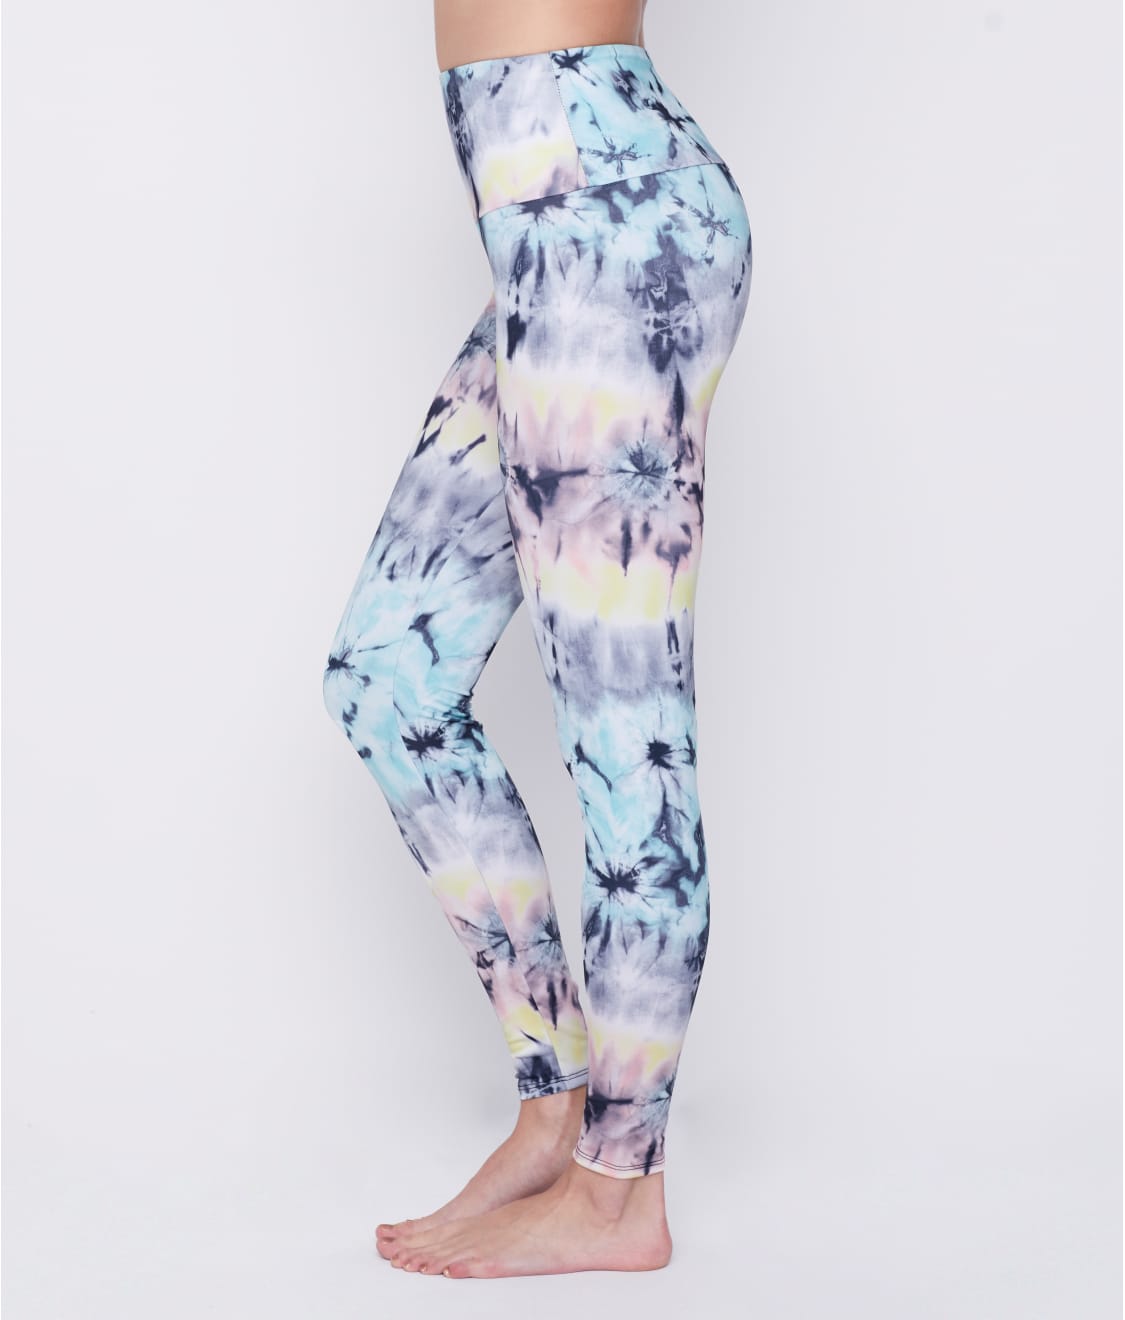 Onzie High Rise Leggings & Reviews | Bare Necessities (Style 228)